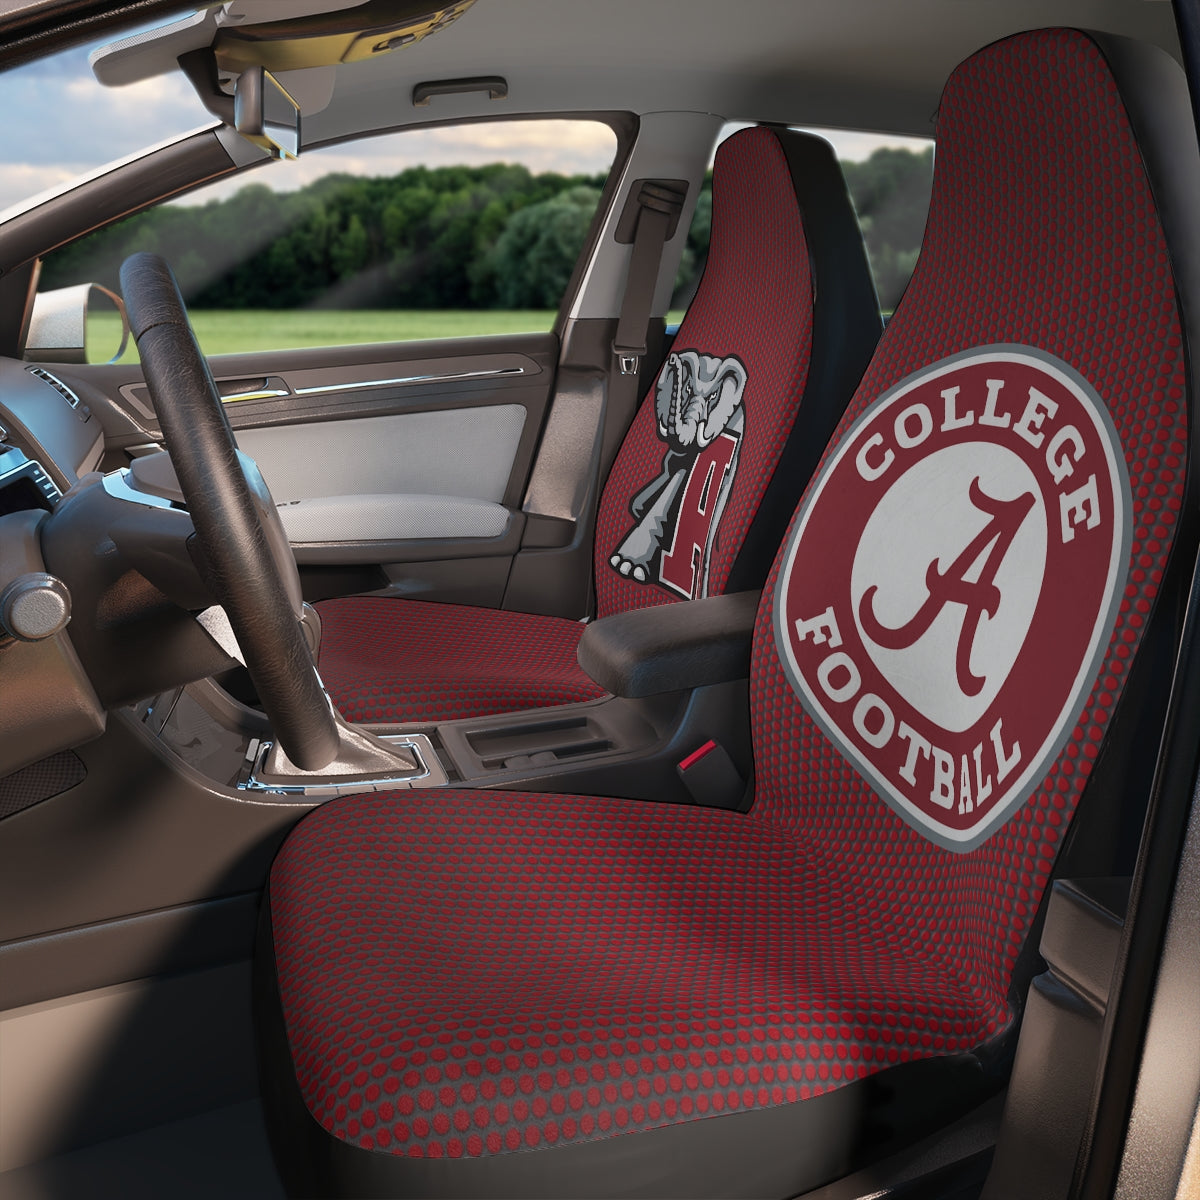 Alabama Car Seat Covers: Show your team pride on the road! Stylish, durable protection for your car seats. Roll with Crimson Tide spirit! 🏈🚗